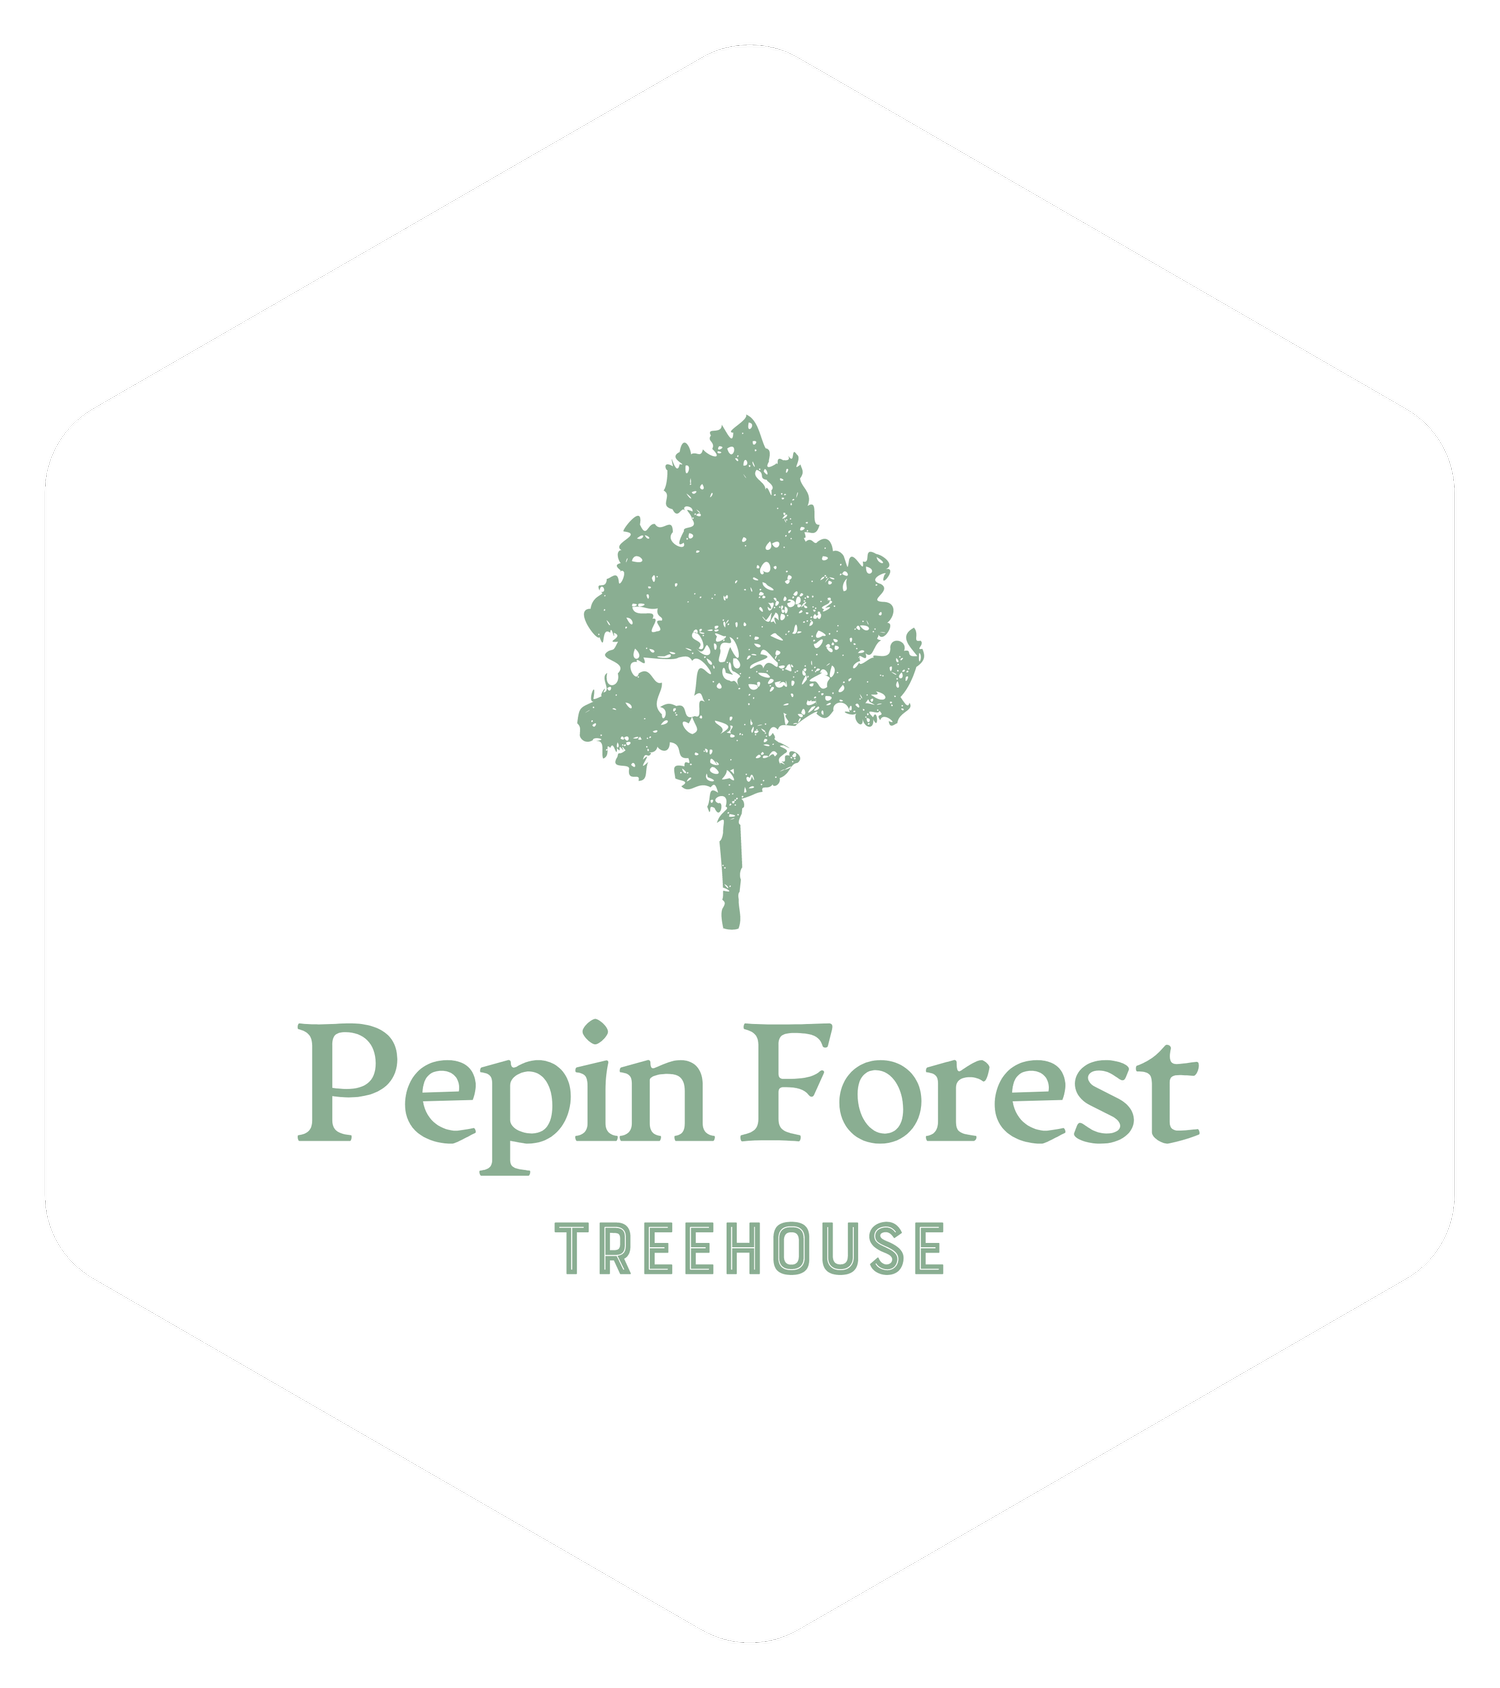 Pepin Forest Treehouse